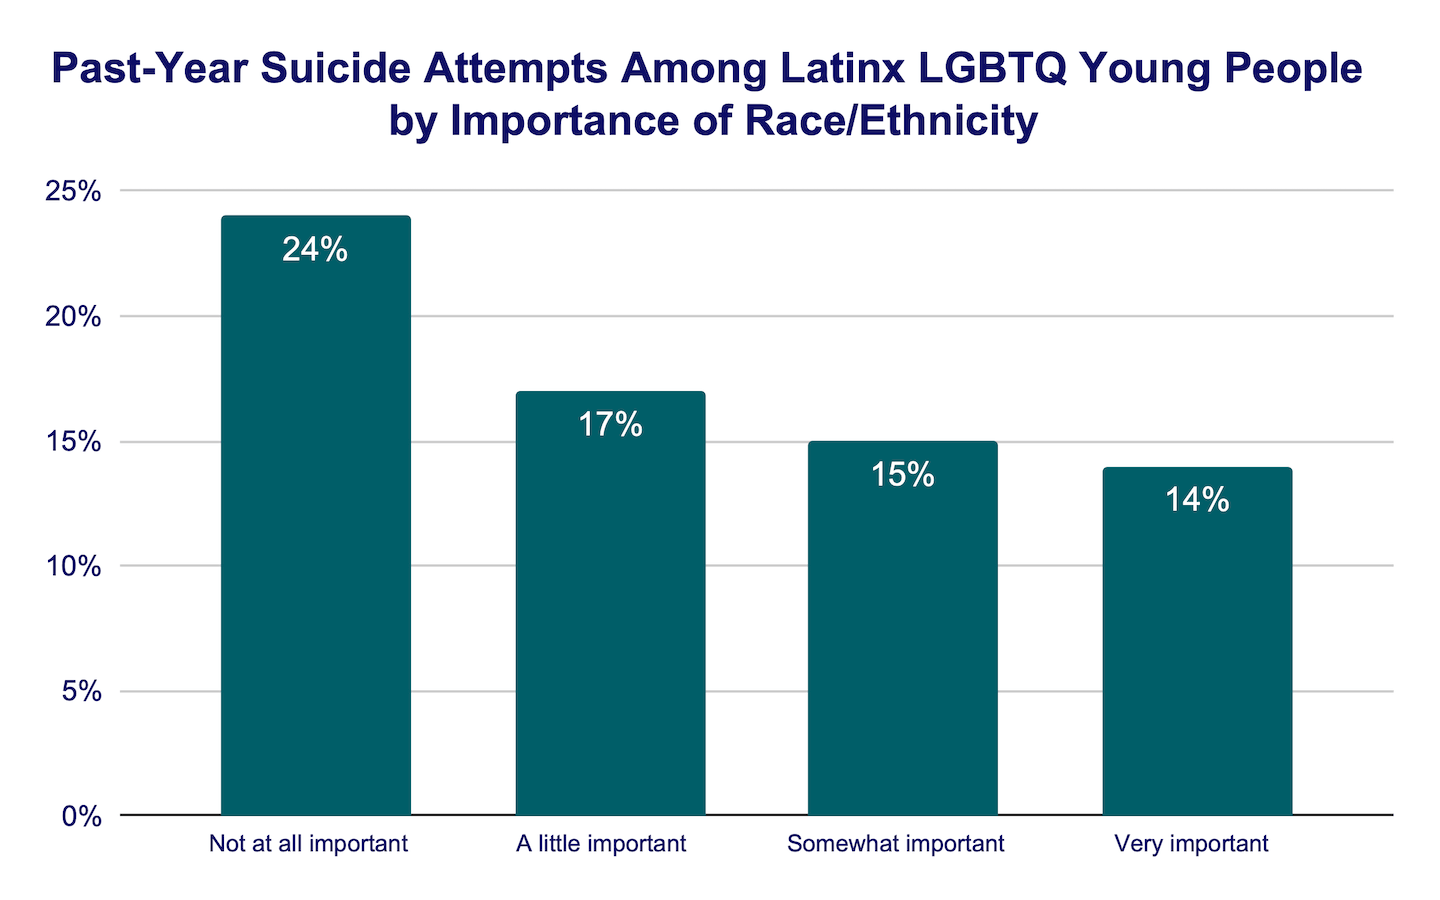 Past-year suicide attempts among Latinx LGBTQ young people by importance of race/ethnicity bar graph